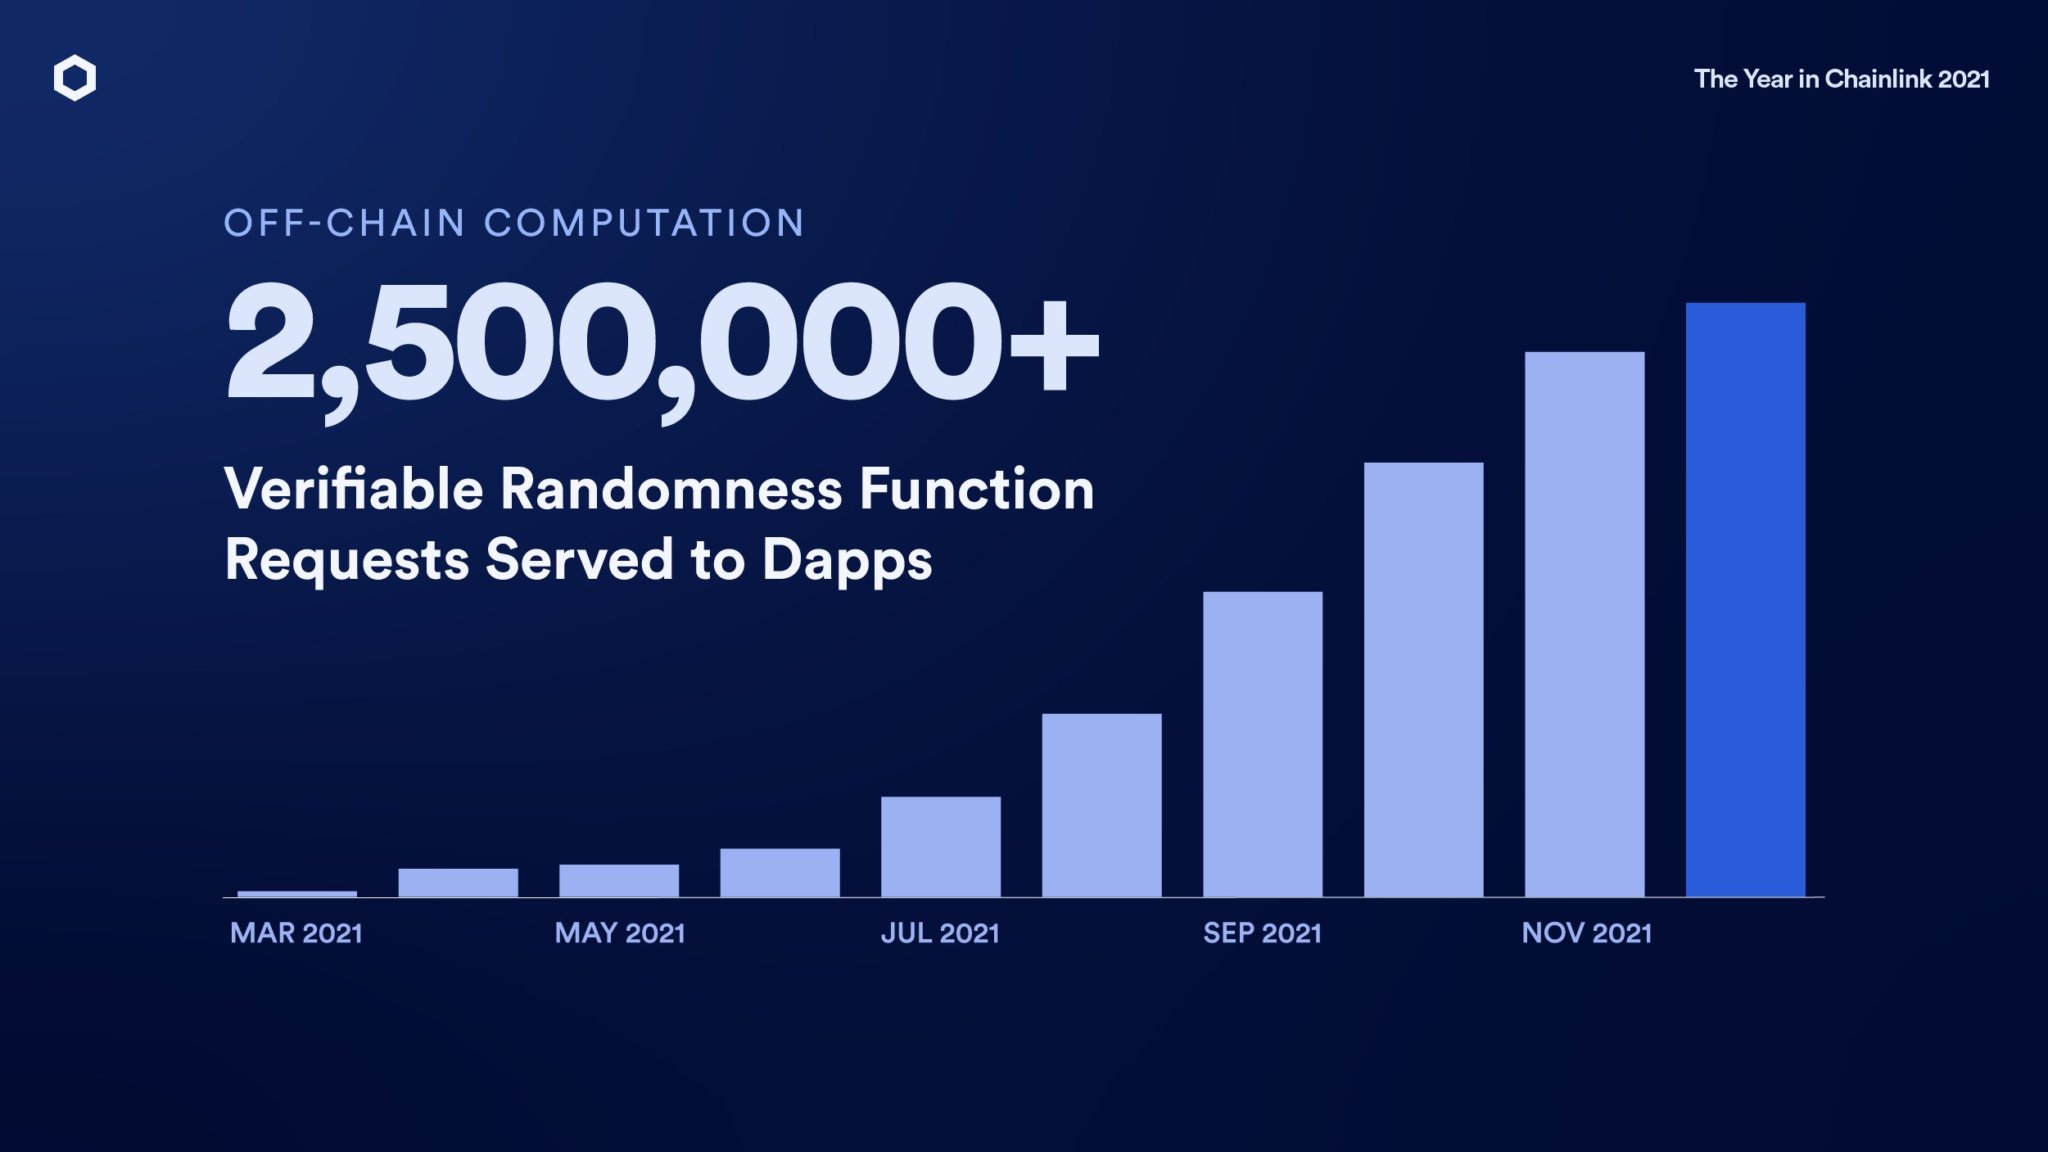 Number of VRF requests served to dapps (Source: Chainlink)